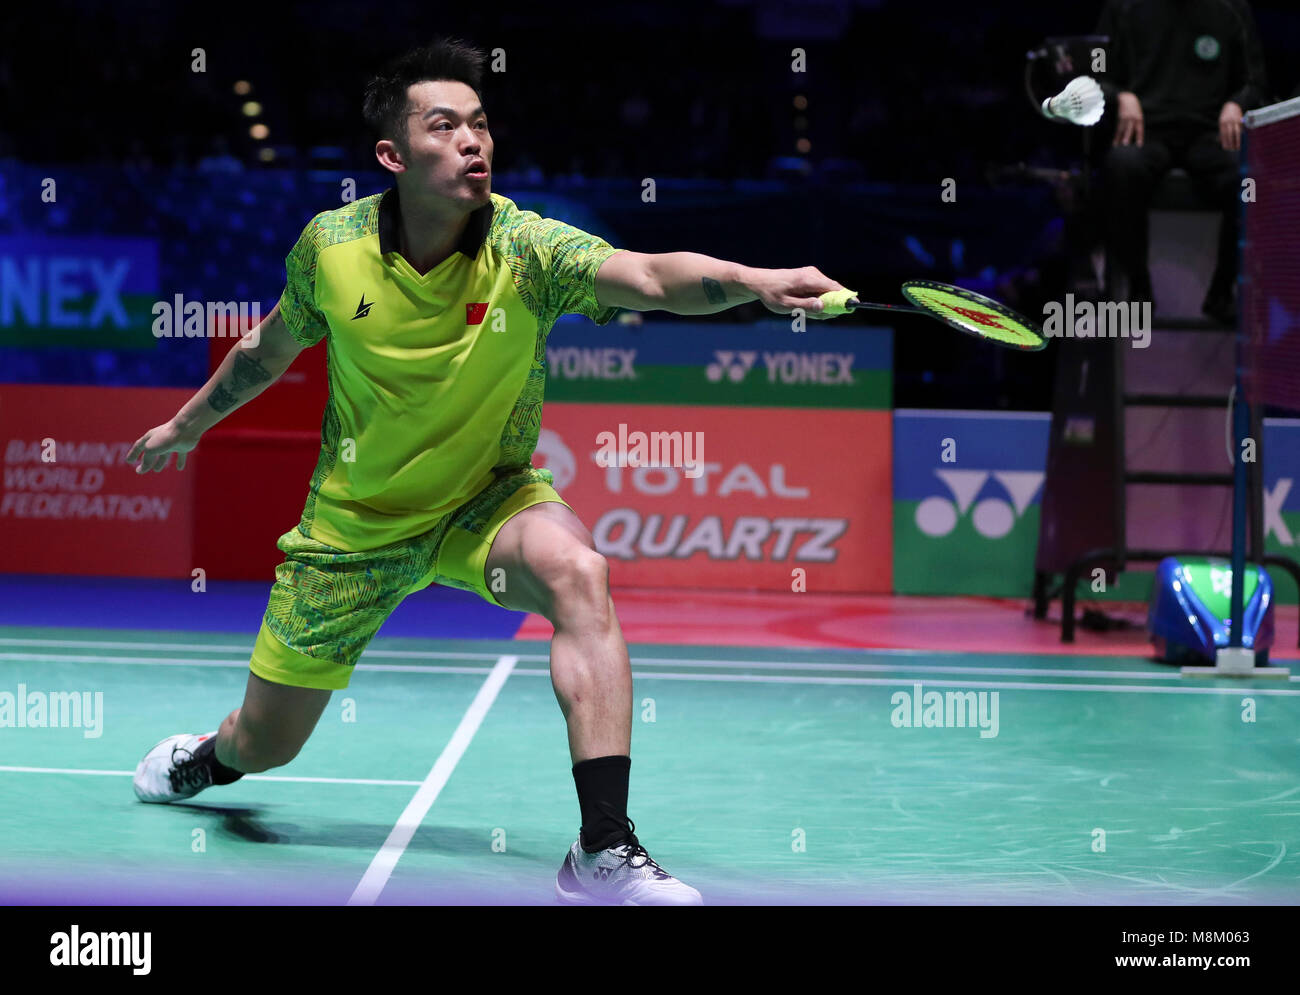 Birmingham. 18th Mar, 2018. Lin Dan of China returns the shot during the men's singles final with his compatriot Shi Yuqi at All England Open Badminton Championships 2018 in Birmingham, Britain on March 18, 2018. Credit: Han Yan/Xinhua/Alamy Live News Stock Photo